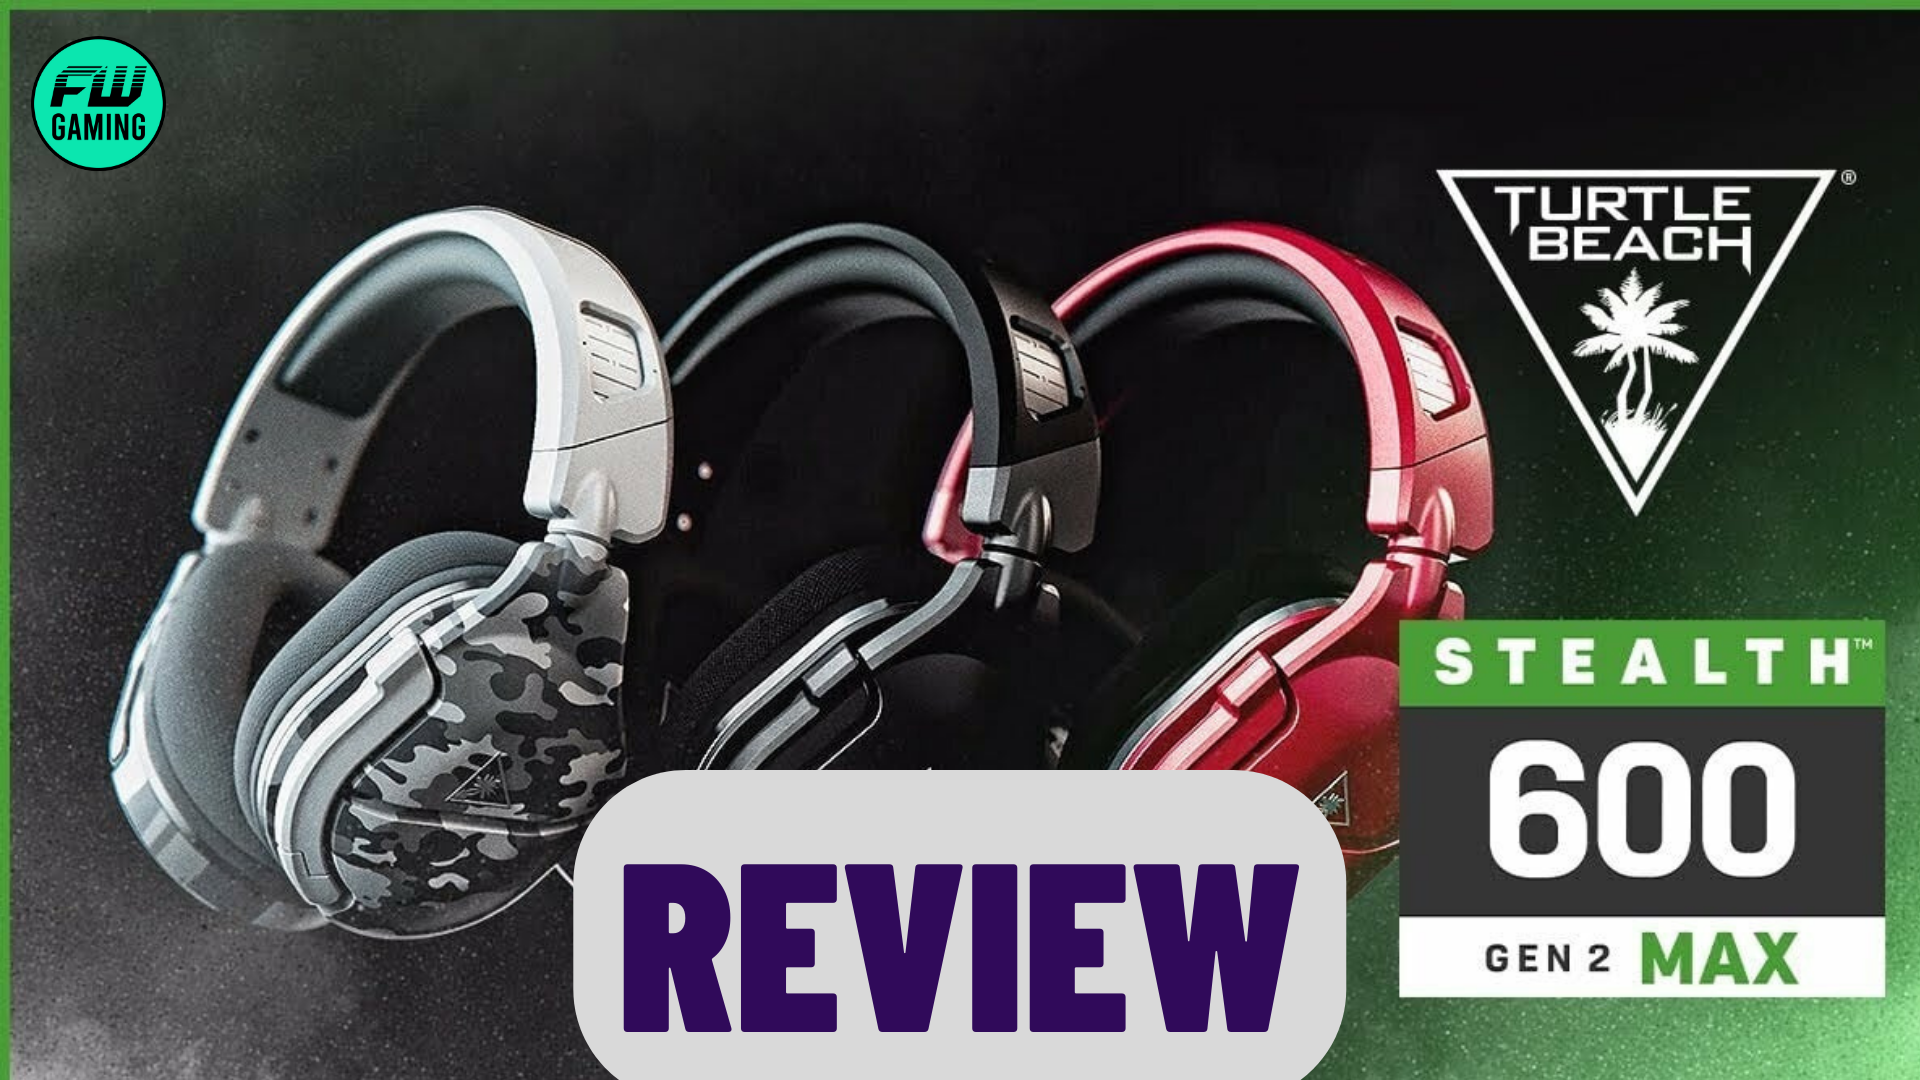 Turtle Beach Stealth 600 Gen 2 MAX headset review – I'm all ears (PS5)